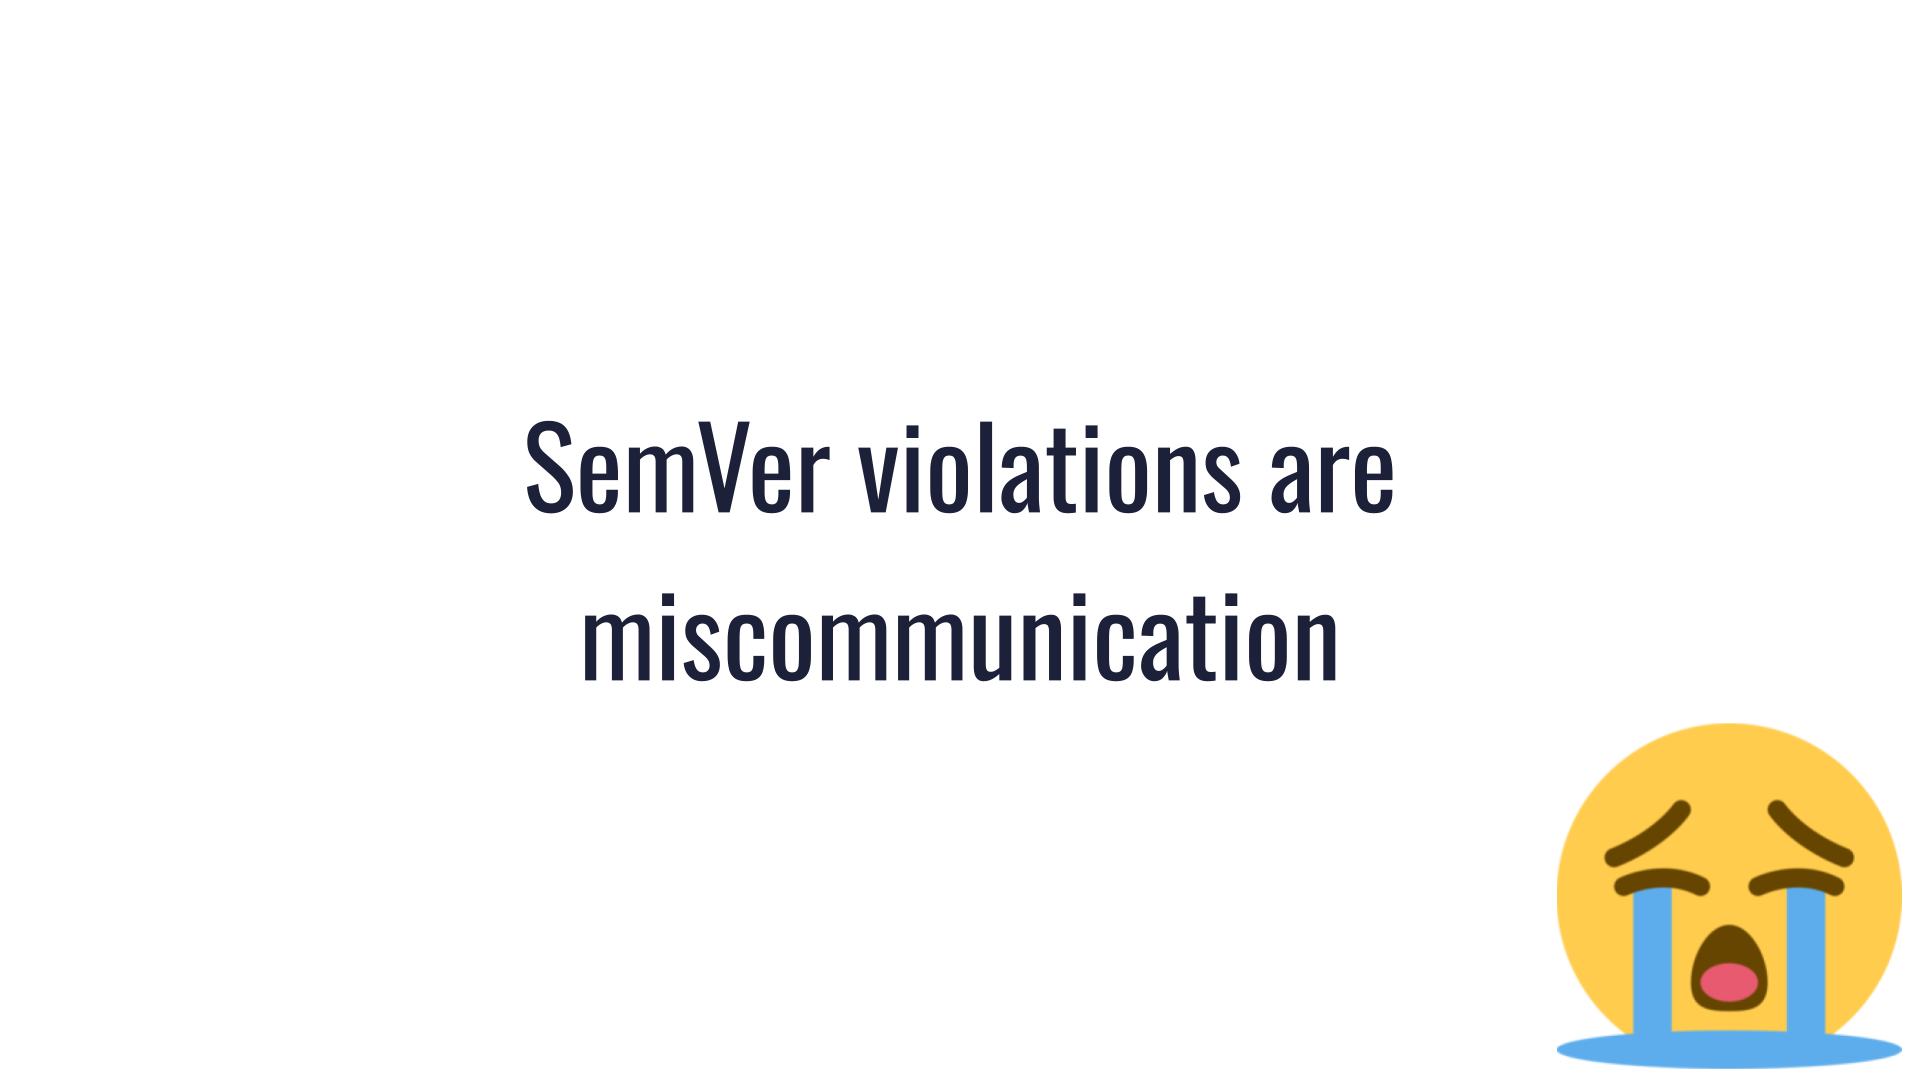 A large sobbing emoji next to the text: "SemVer violations are miscommunication"